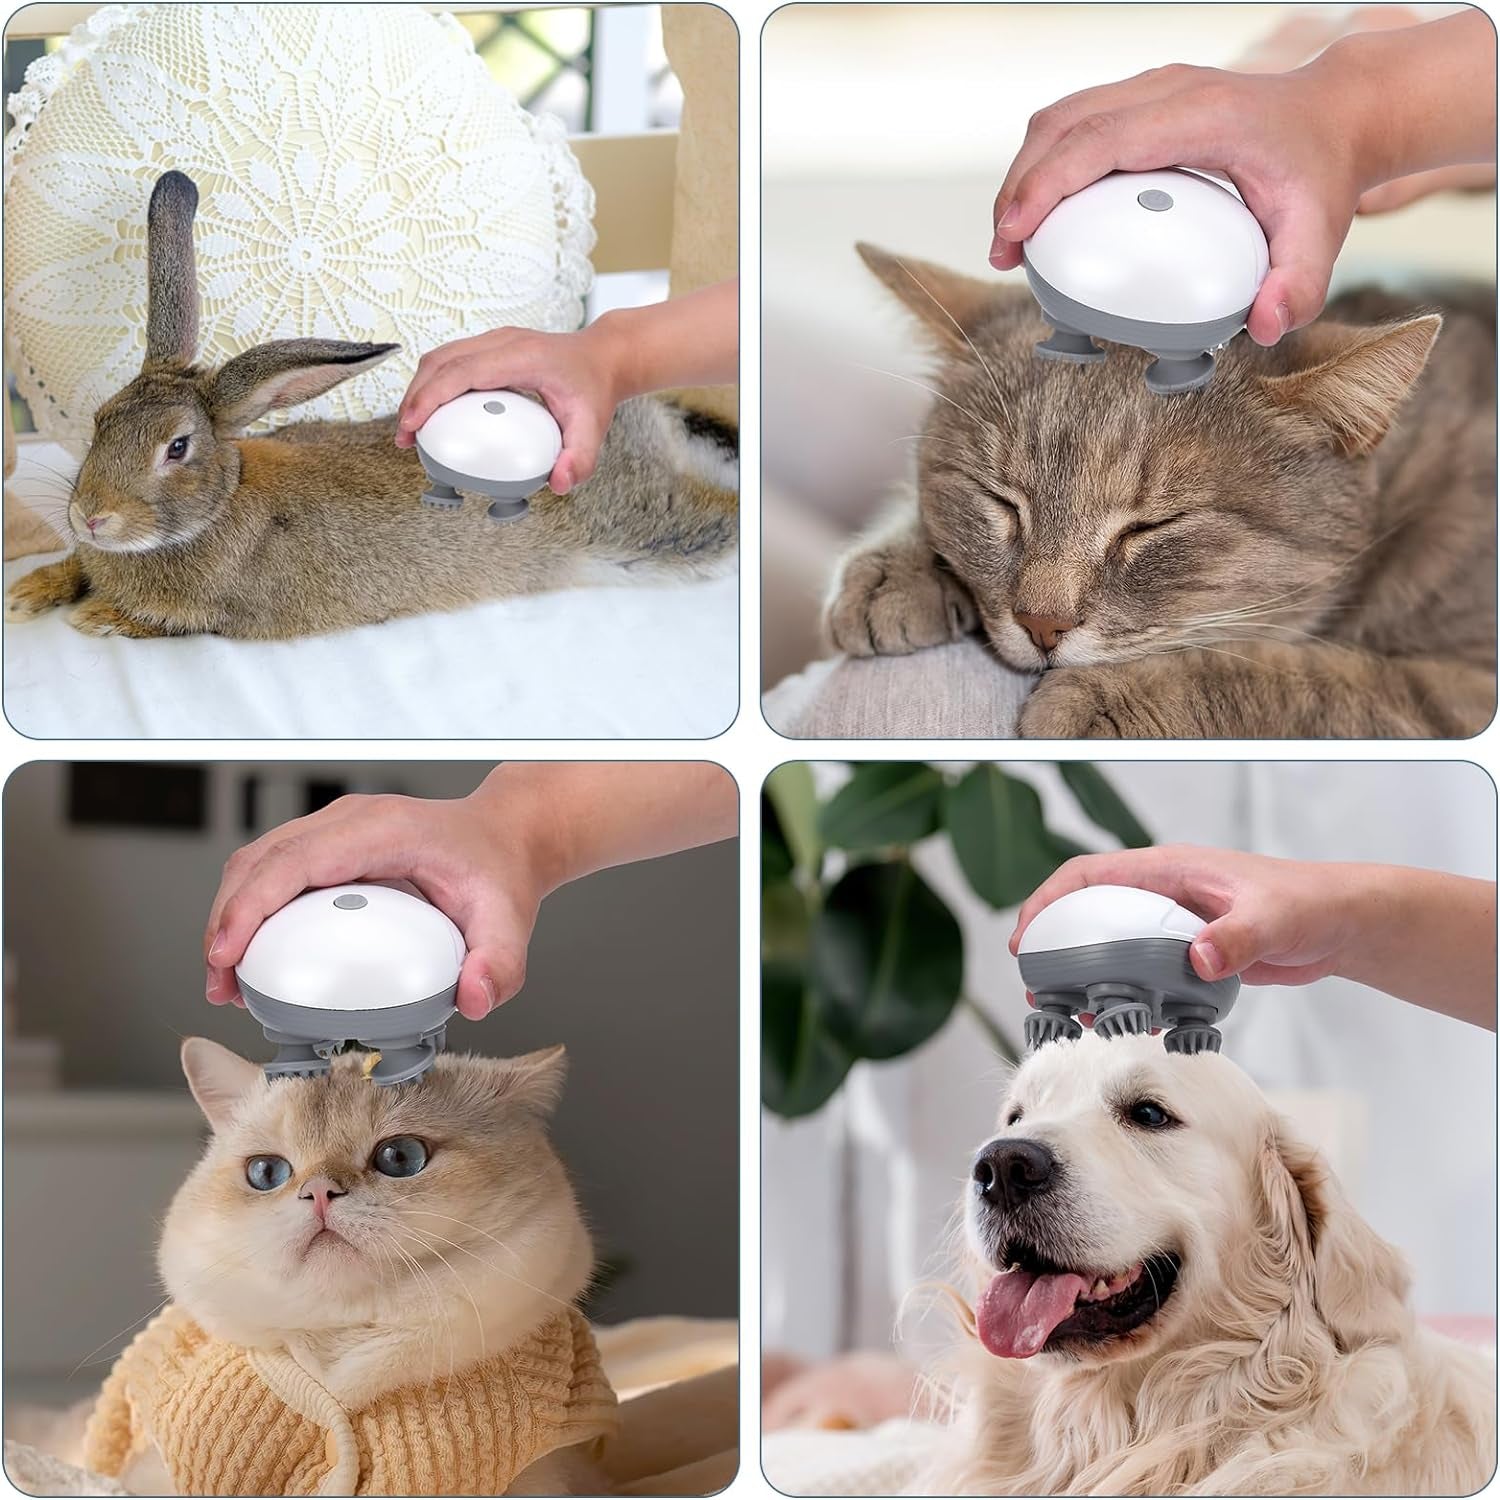 Upgraded Handheld Pet Massager for Dogs and Cats, Electric Cat Massager Dog Massager, with 4 Rotatable Massage Heads, Three Modes, for Relieving Tight Stiffness Muscles, Promote Bonding